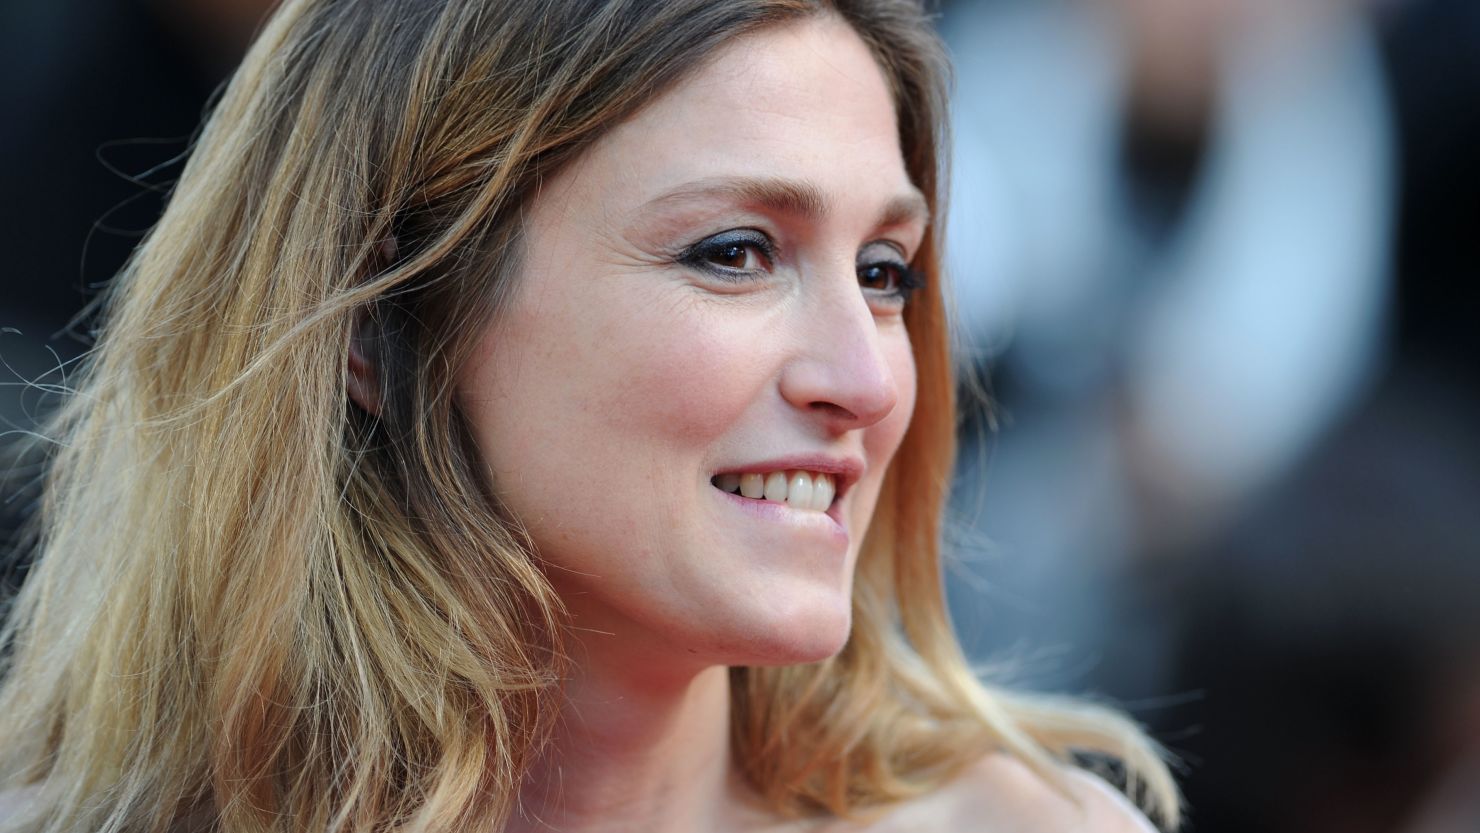 Photographs in Closer magazine violated Julie Gayet's right to privacy.